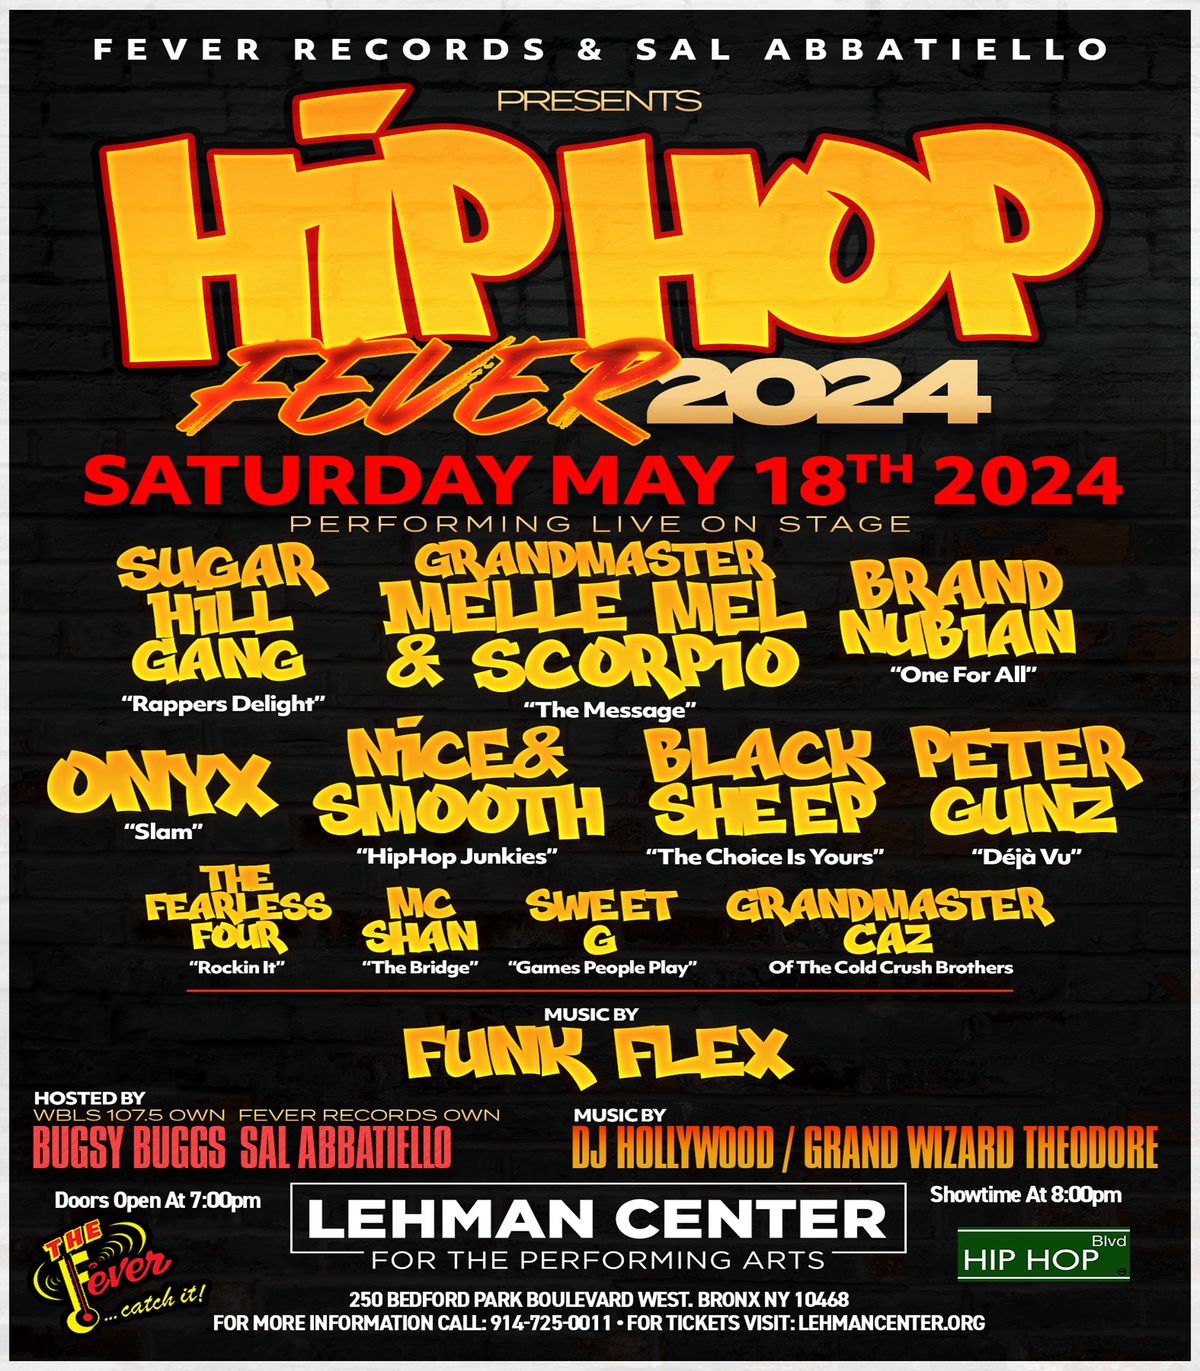 Hip-Hop Fever 2024 @ Lehman Center For Performing Arts, Bronx NY